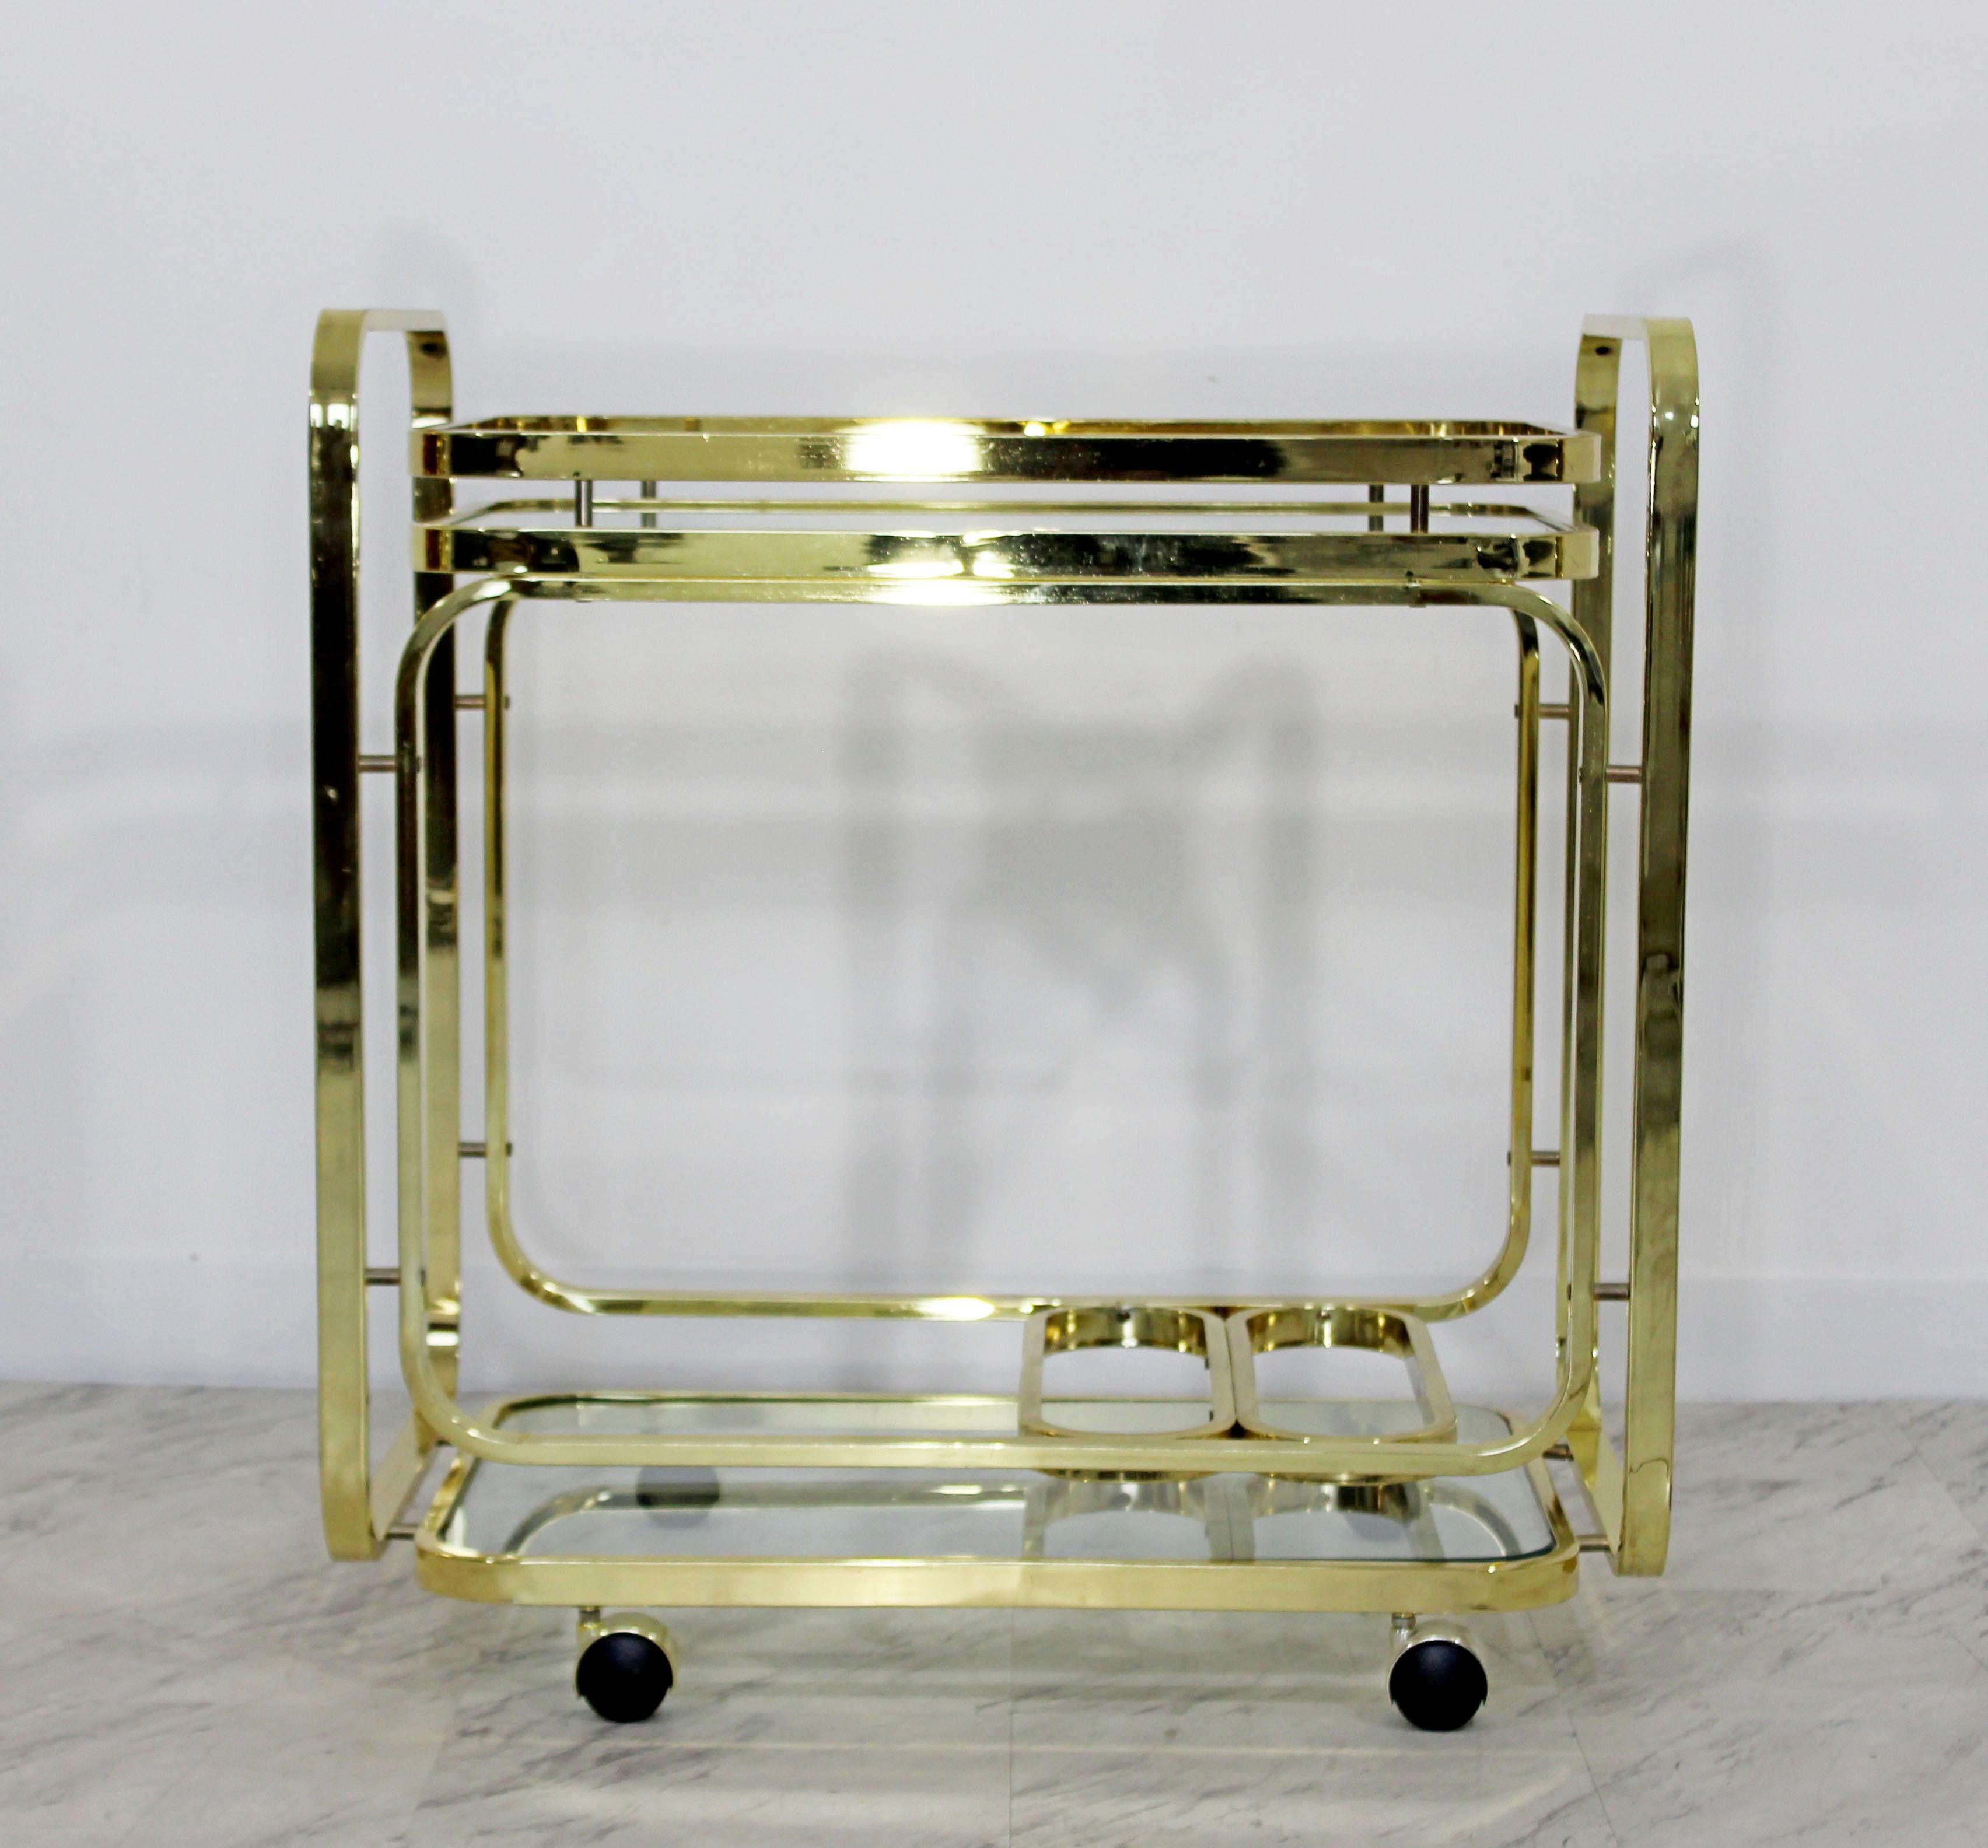 For your consideration is a magnificent, two-tiered, brass and glass, rolling bar or serving cart, by Milo Baughman for the Design Institute of America, circa 1970s. In excellent condition. The dimensions are 29